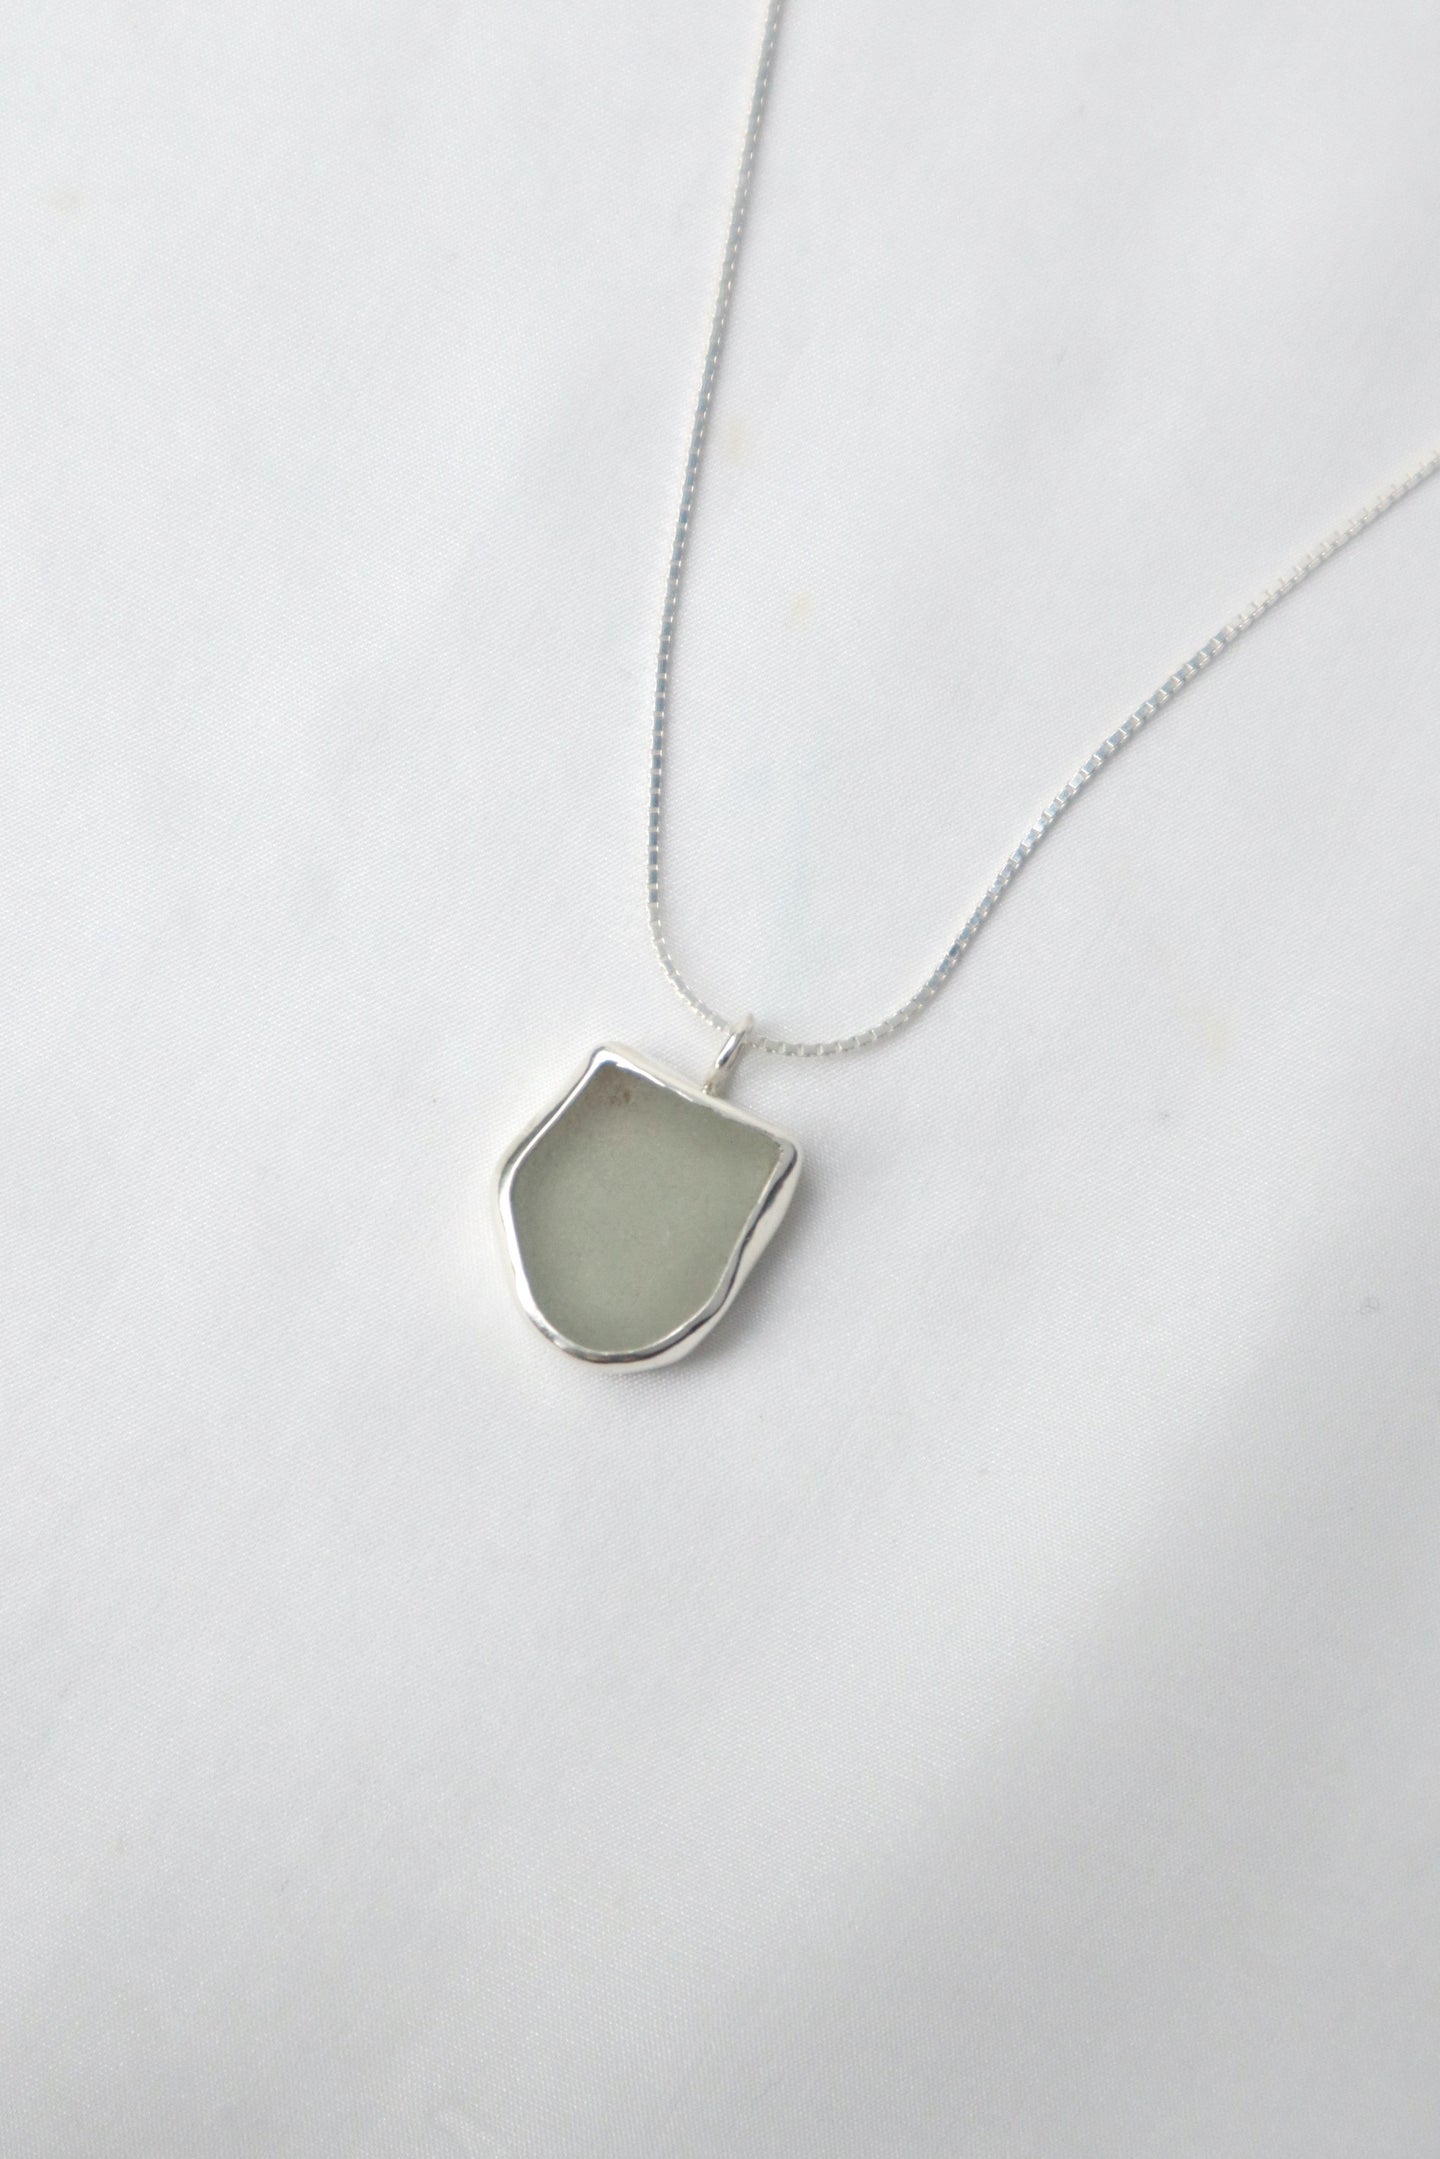 Sage green sea glass and silver necklace